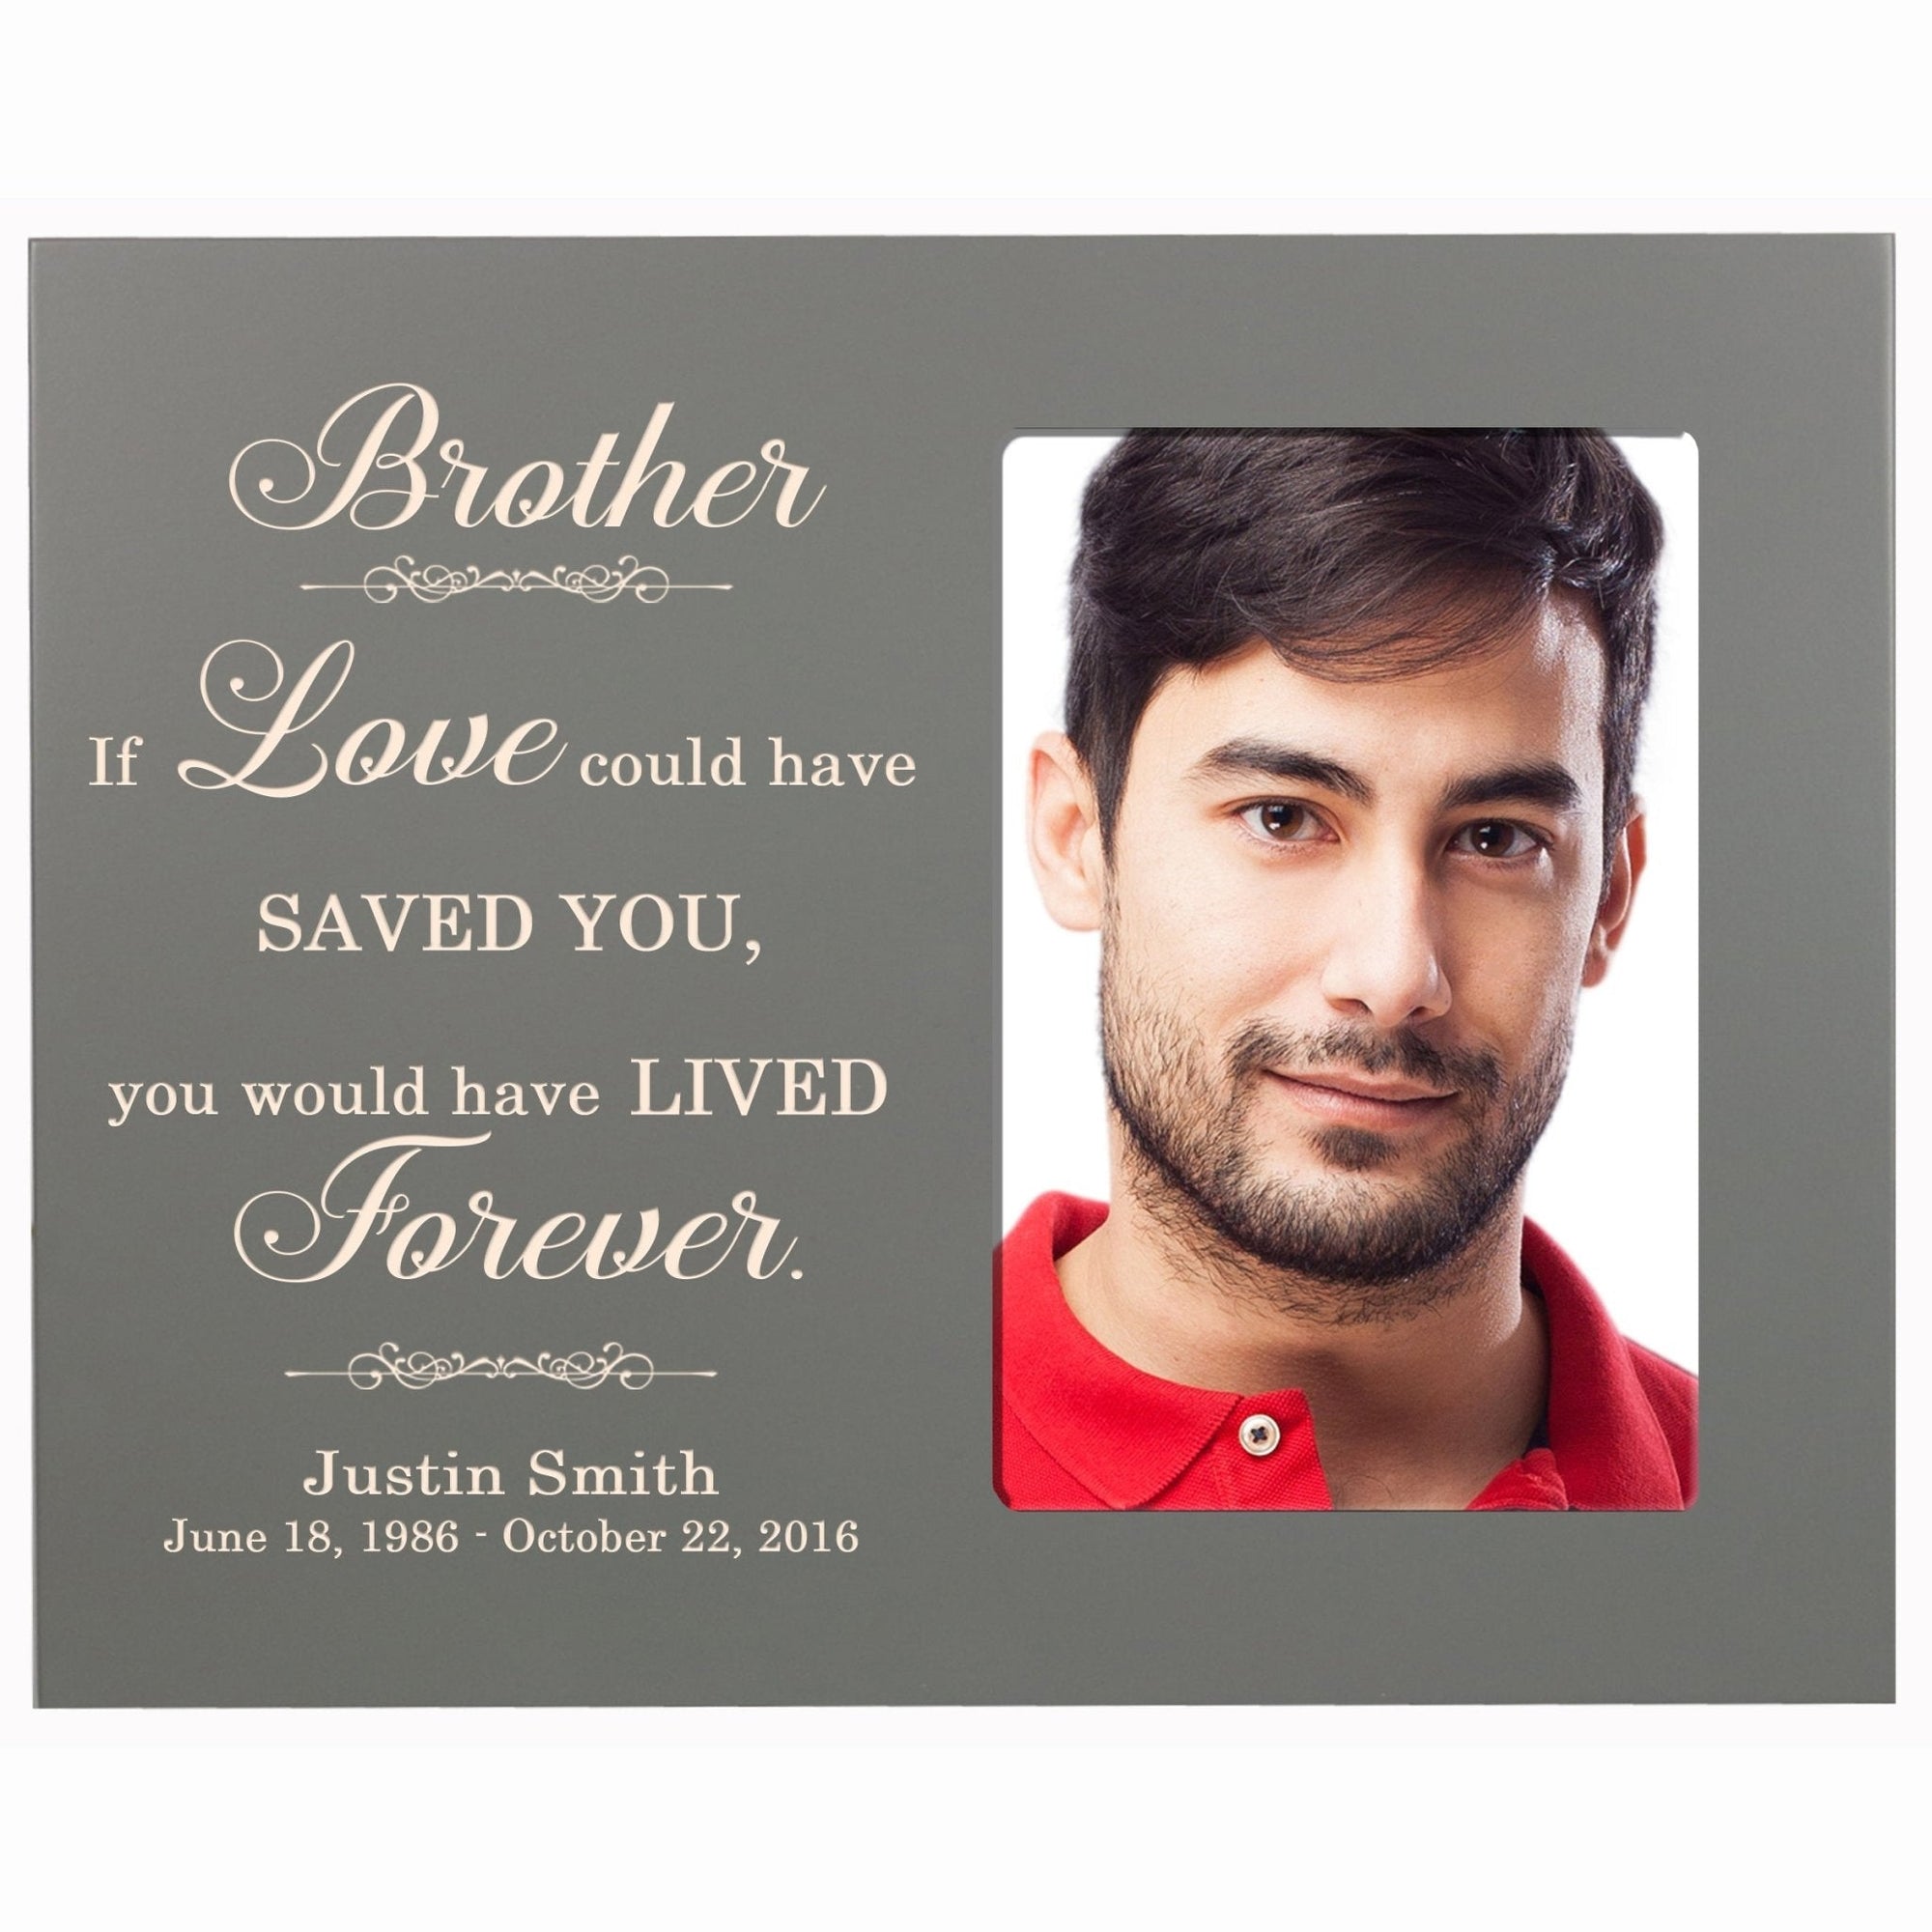 Personalized Horizontal 8x10 Wooden Memorial Picture Frame Holds 4x6 Photo - Brother, If Love Could - LifeSong Milestones